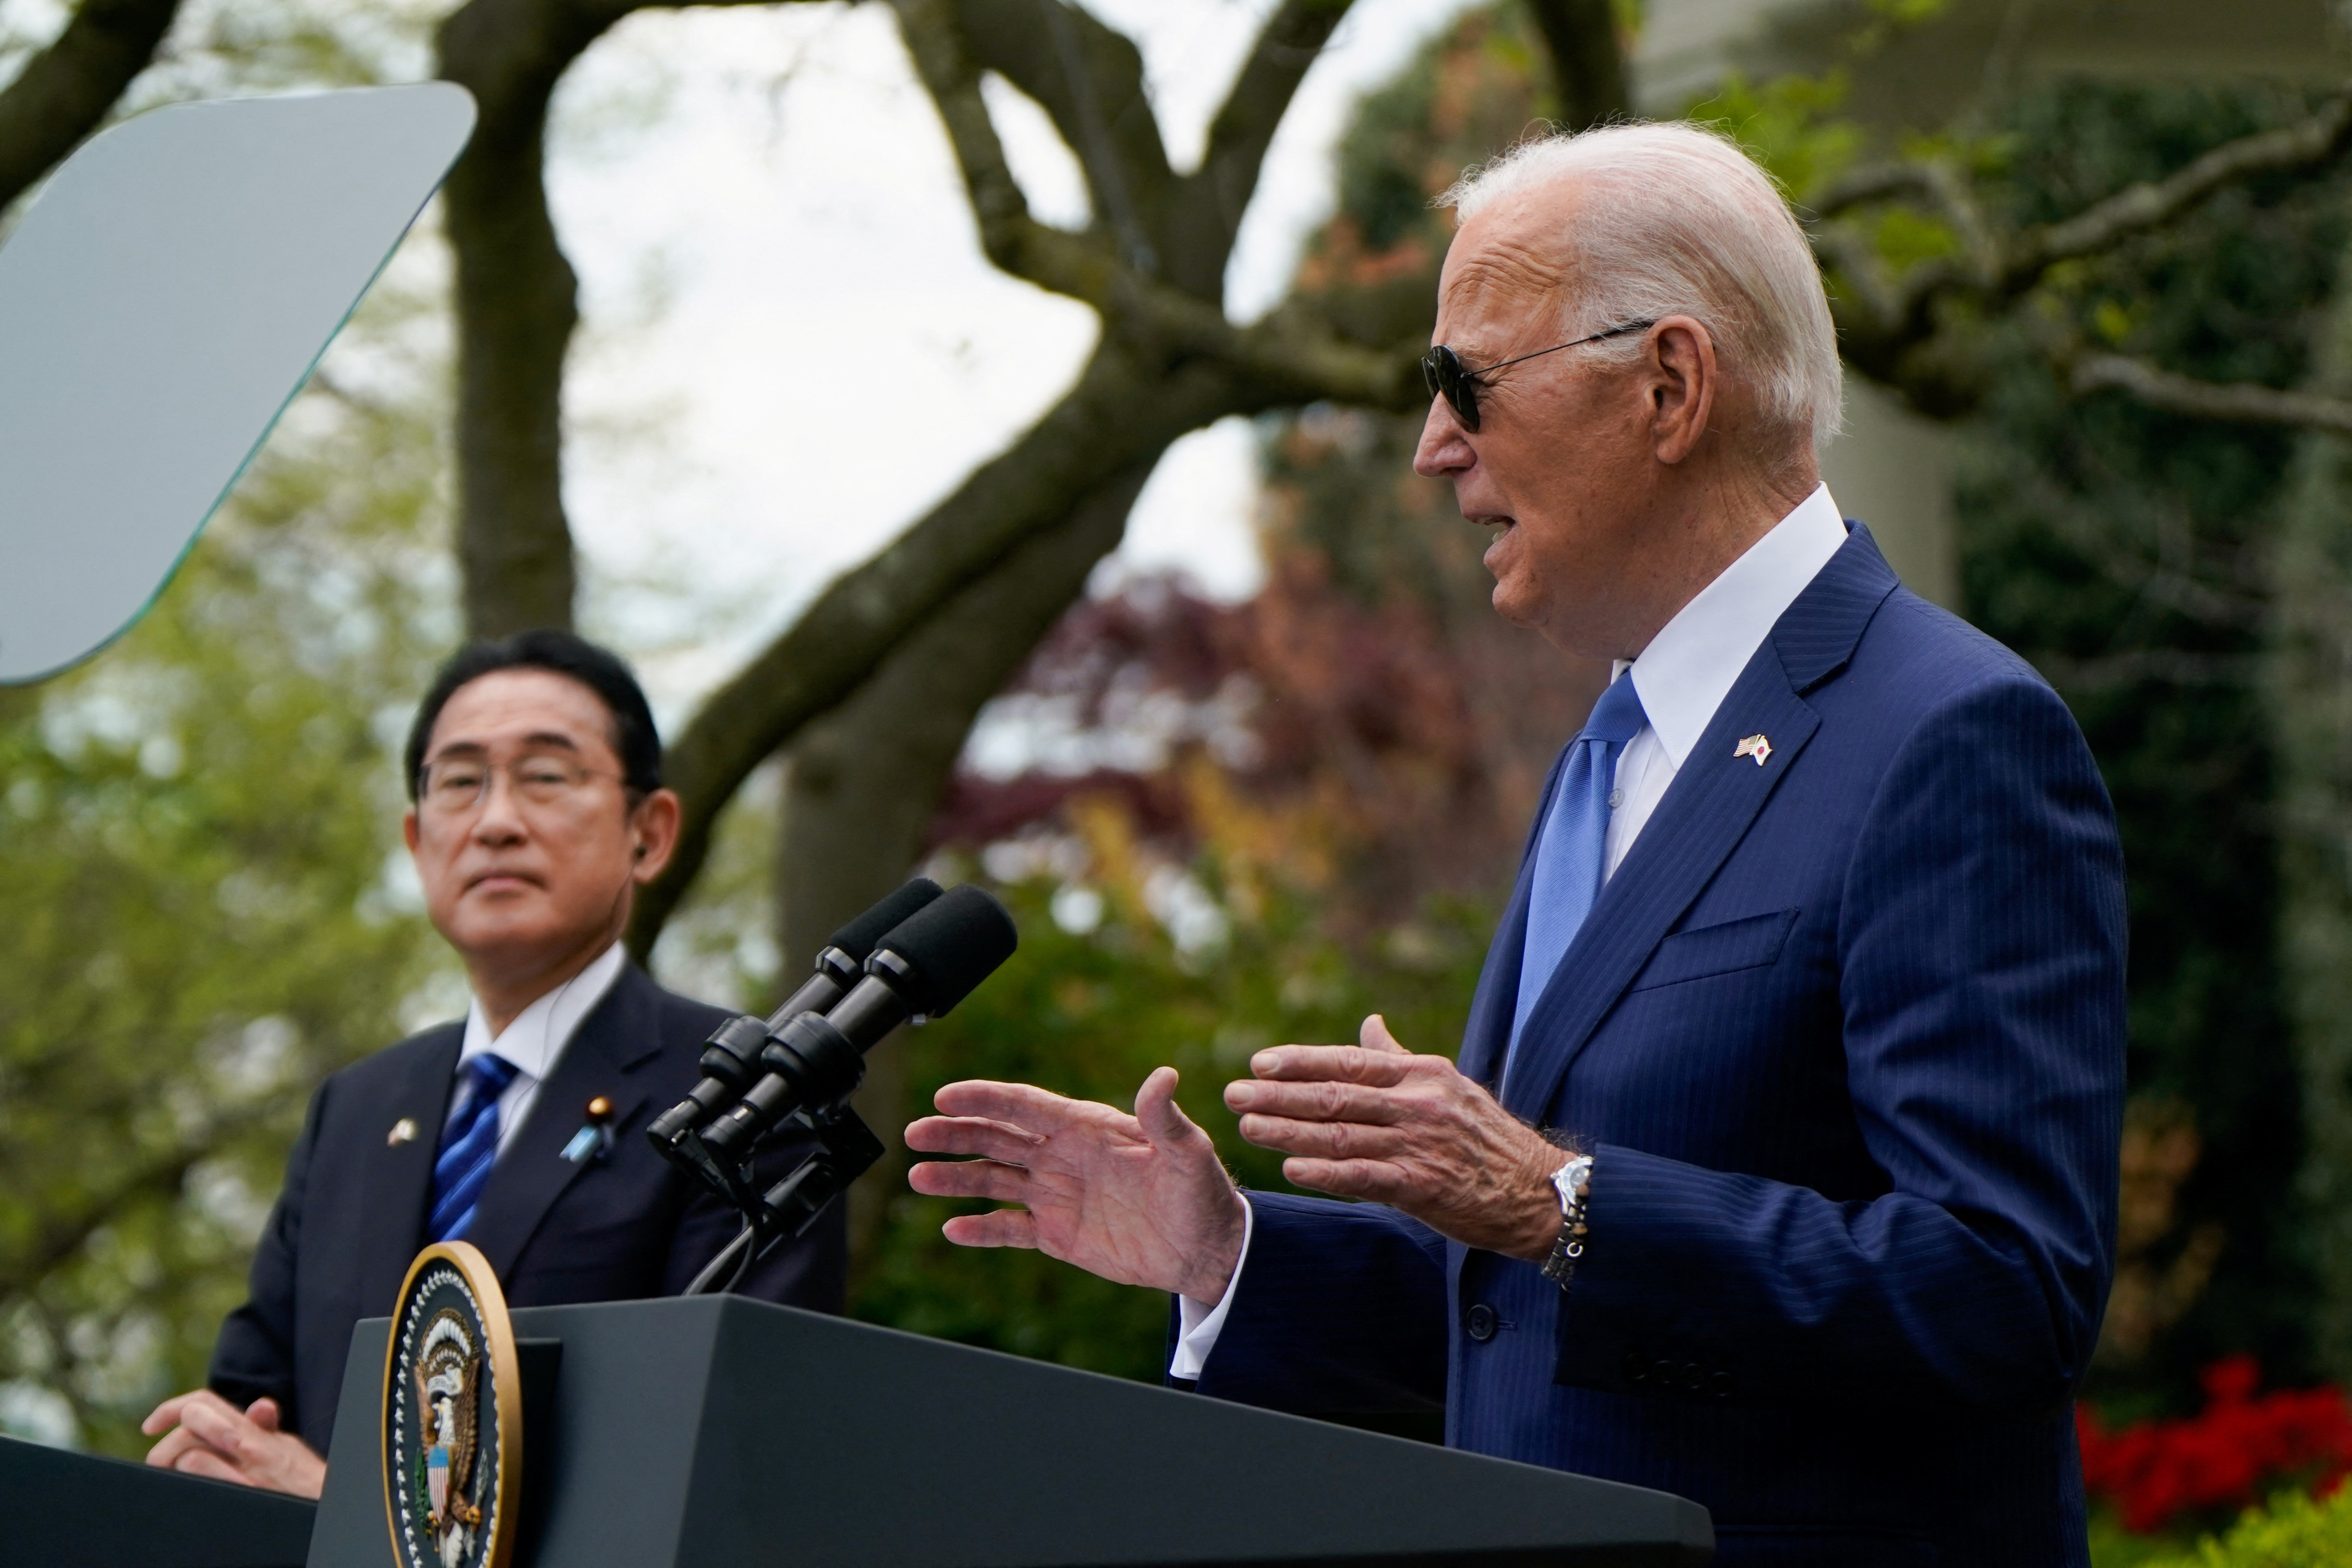 U.S. President Joe Biden and Japanese PM Fumio Kishida hold a joint press conference in the Rose Garden at the White House in Washington